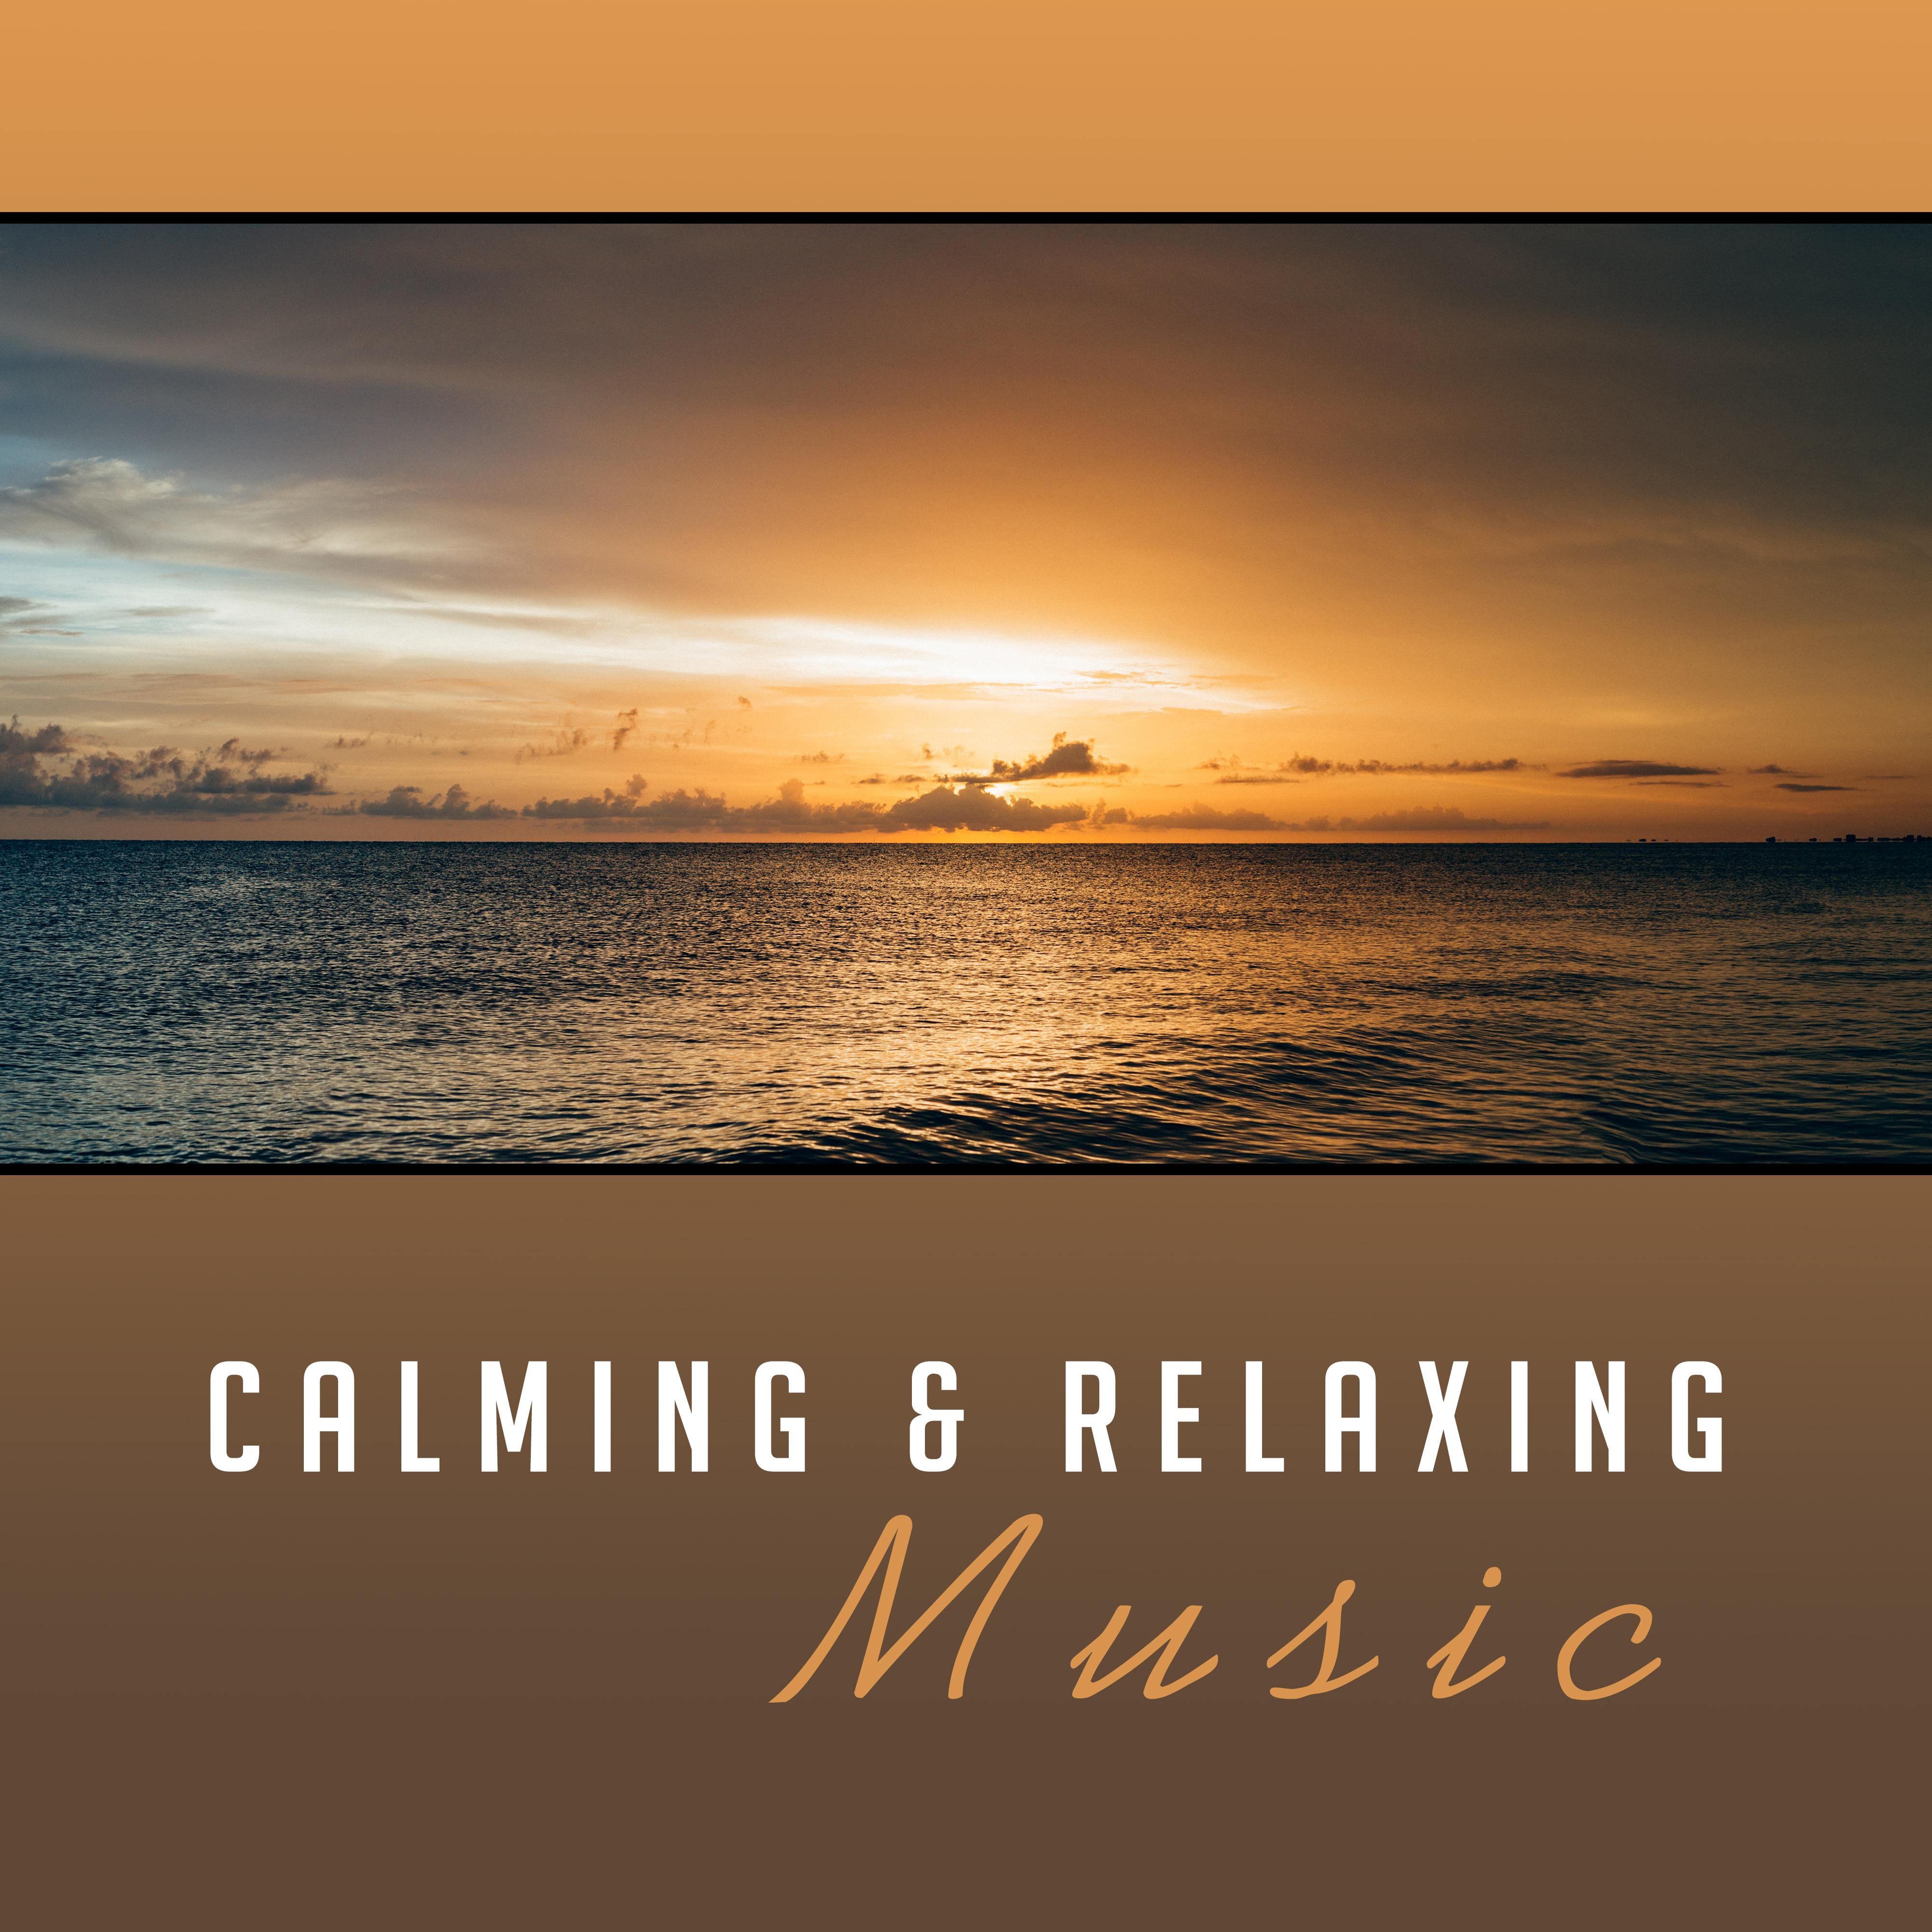 Calming & Relaxing Music – Summer Songs to Relax, Easy Listening, Peaceful Sounds, Stress Relief